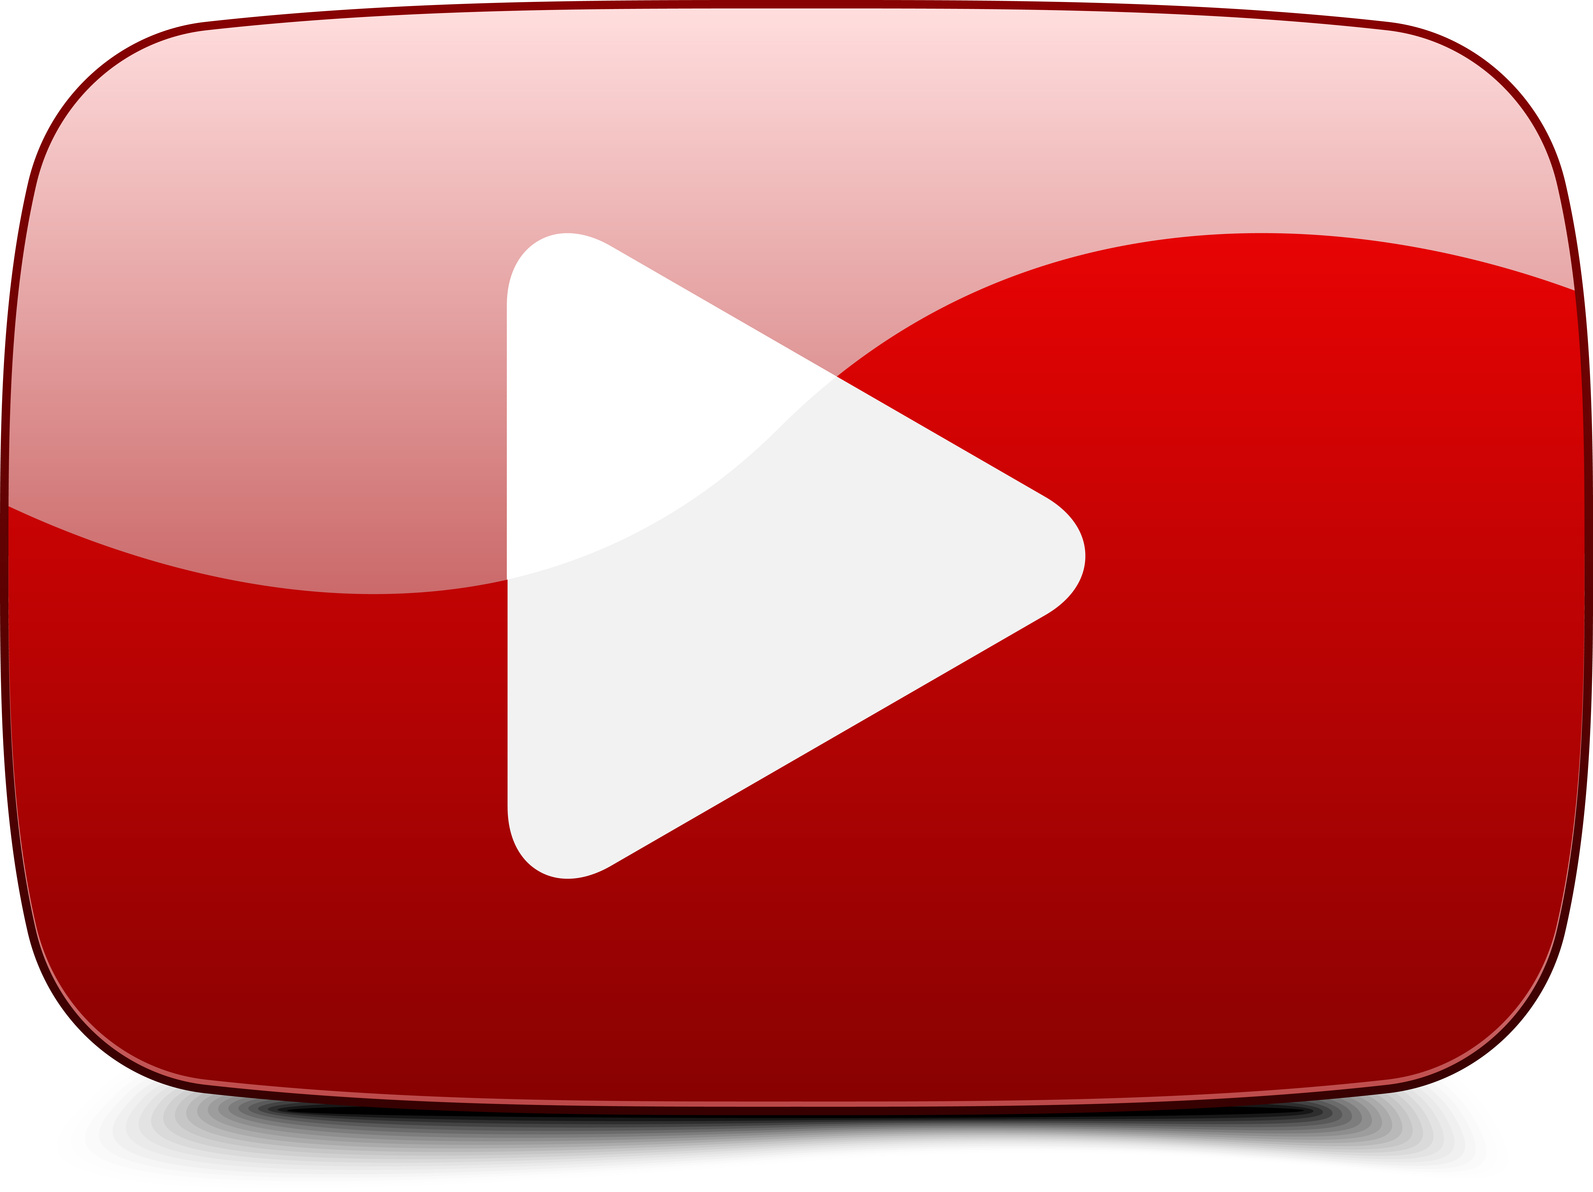 Youtube Play Button Png - Cliparts.co